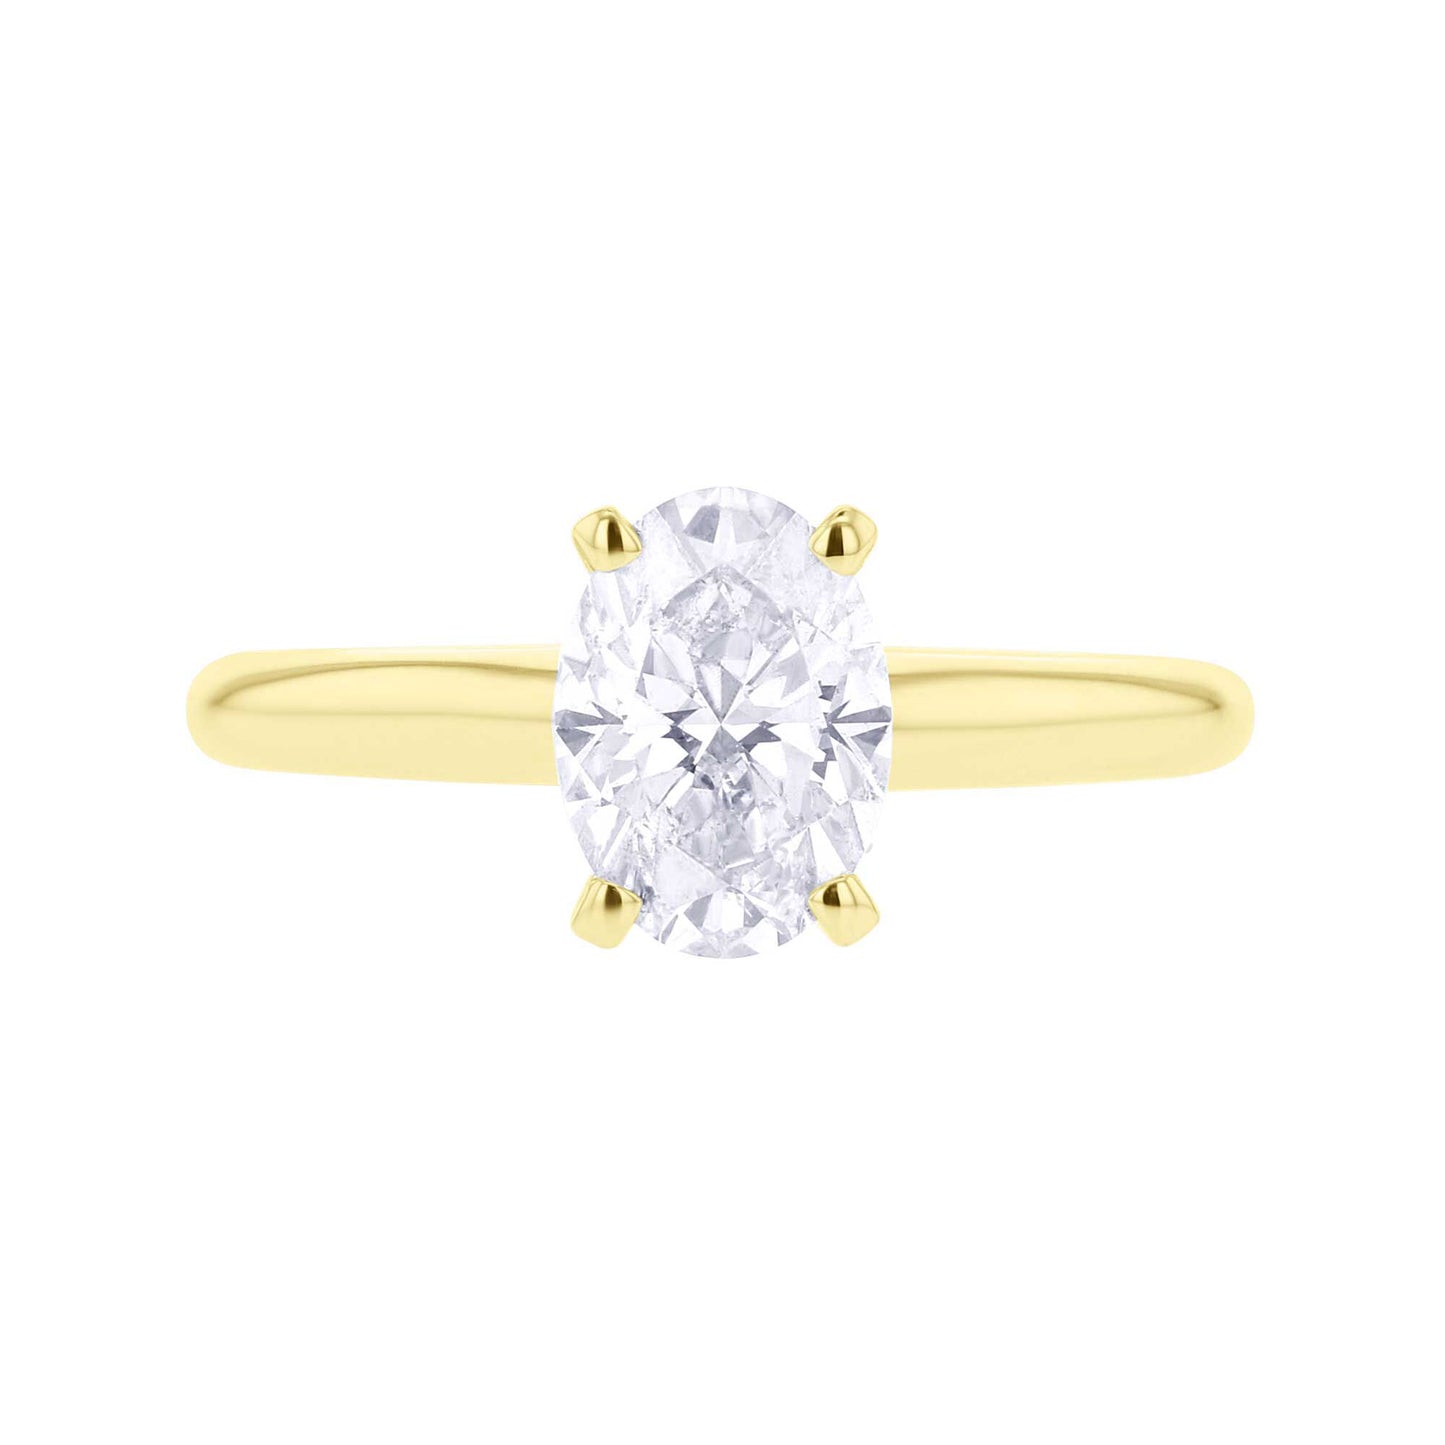 Christa Oval Ready for Love Diamond Engagement Ring 1ct